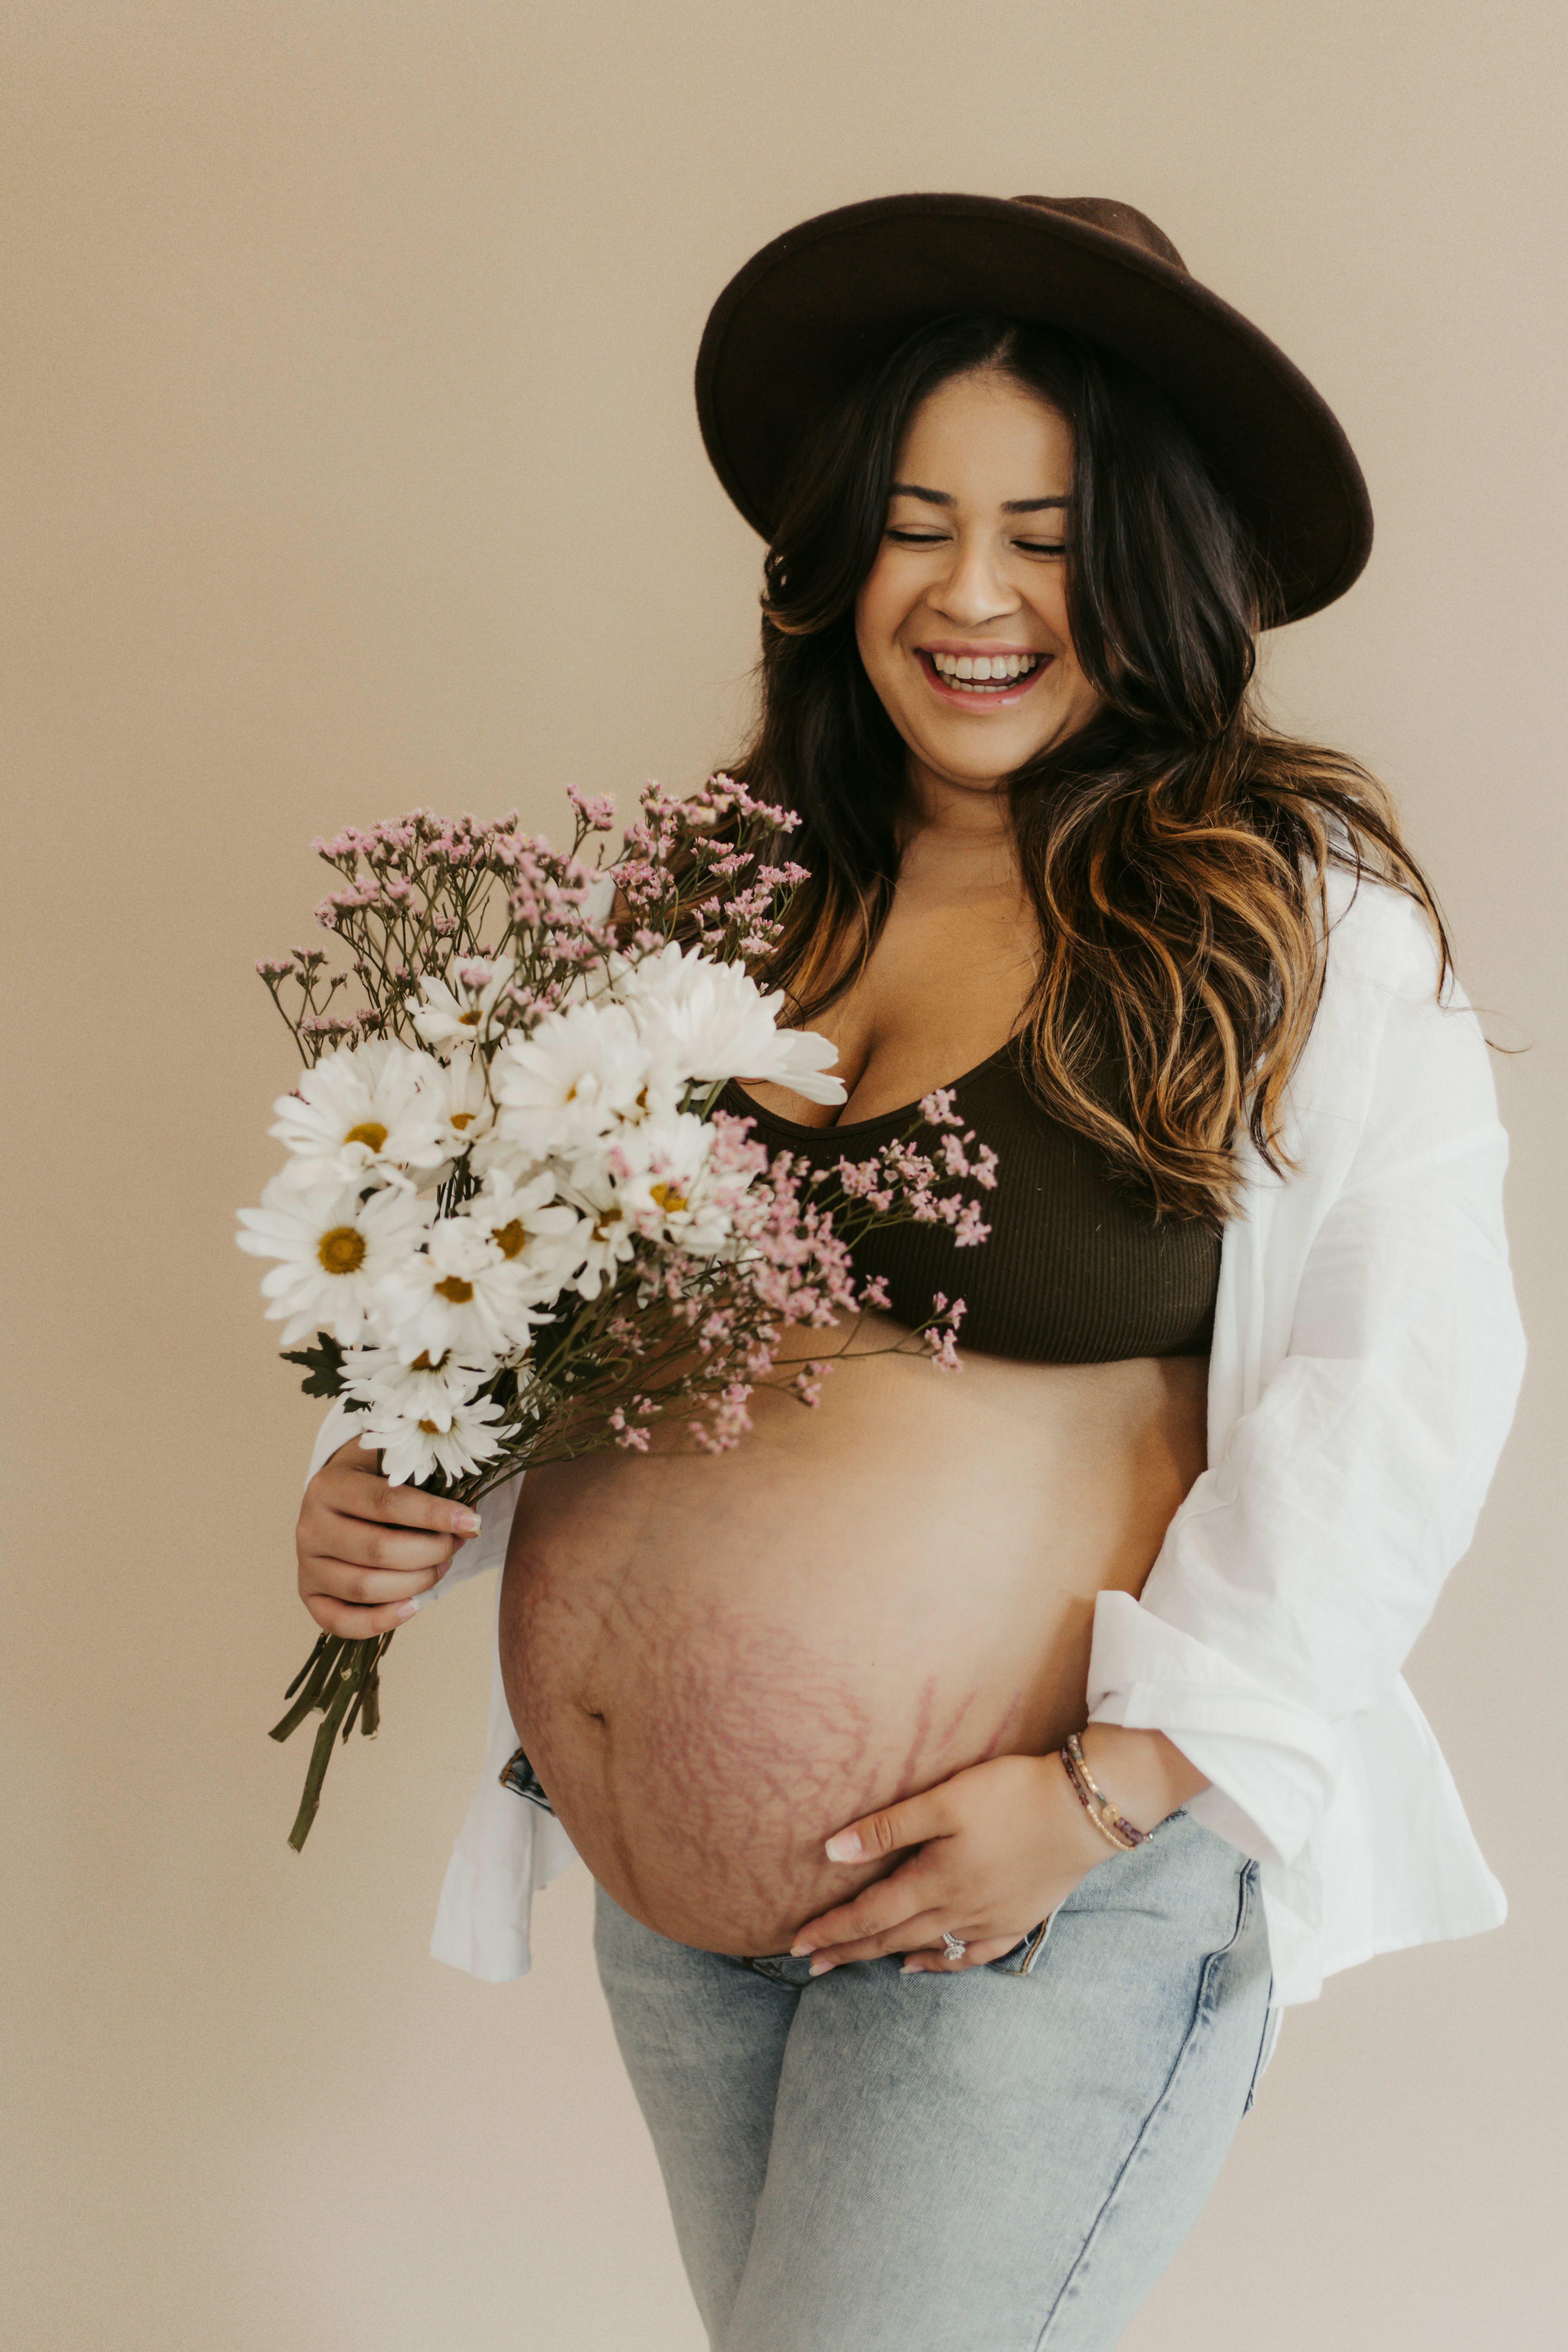 A country-themed maternity photo shoot featuring a pregnant woman holding a bouquet of flowers.